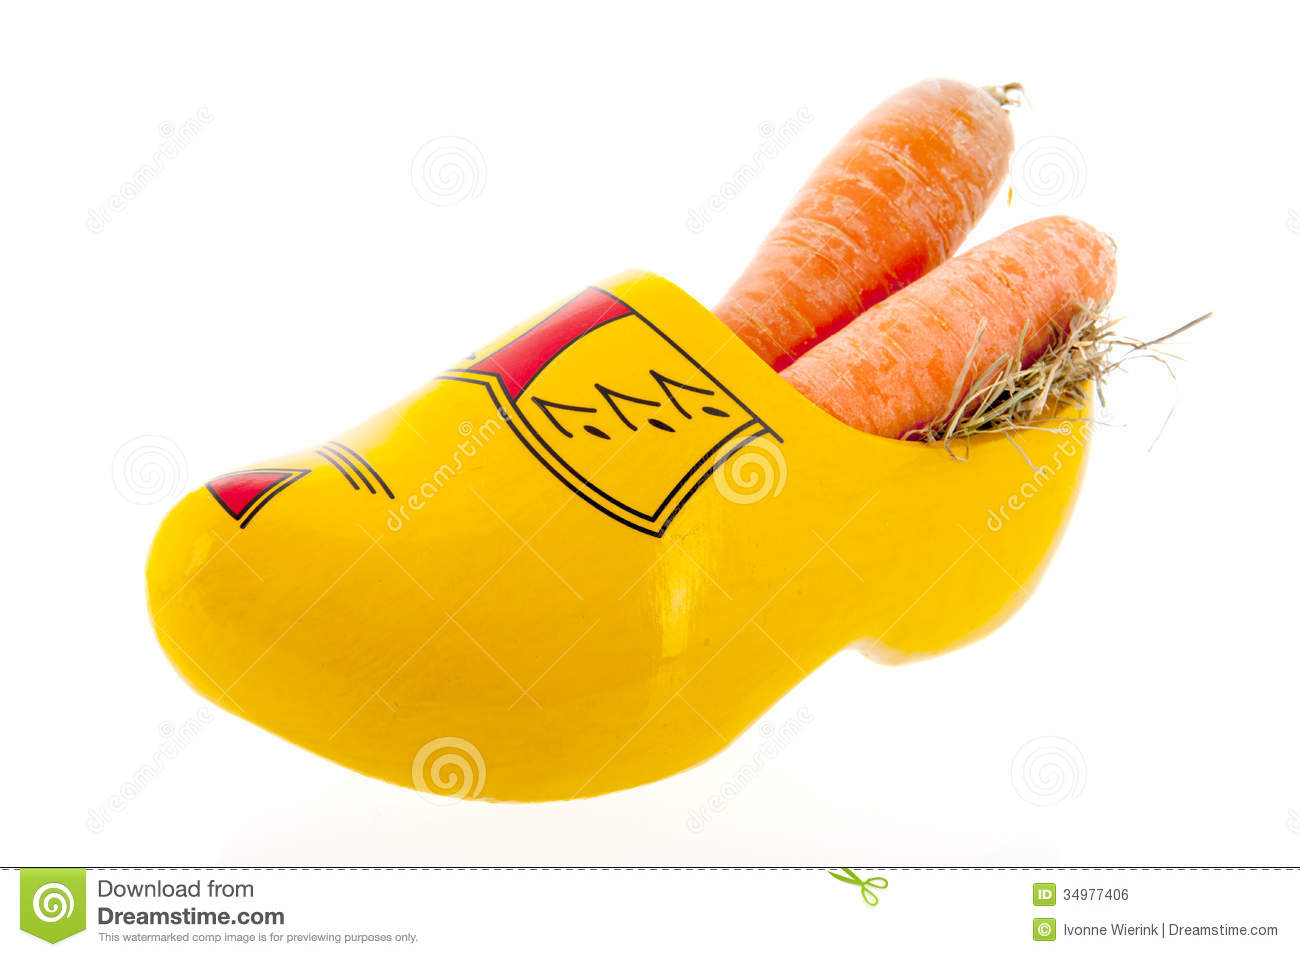 Carrots For Sinterklaas Royalty Free Stock Image   Image  34977406